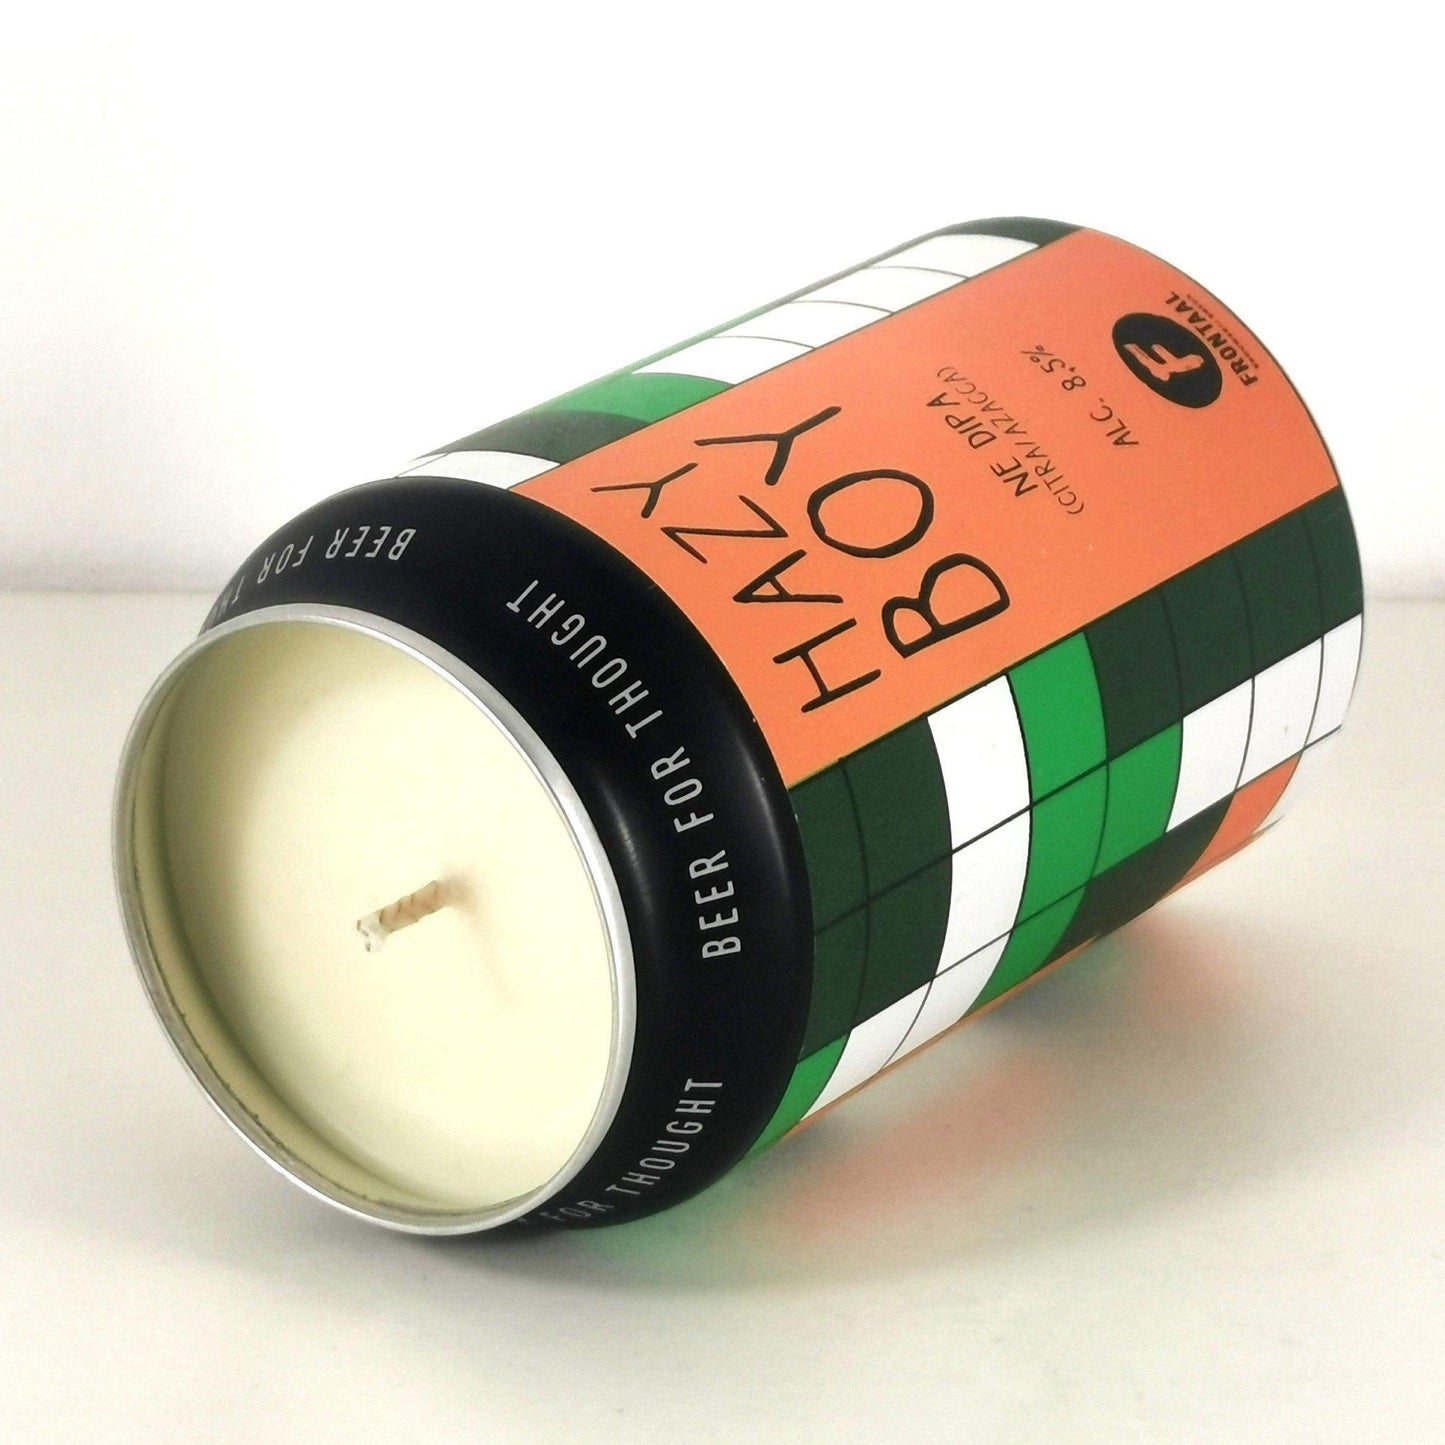 Hazy Boy IPA Craft Beer Can Candle Beer Can Candles Adhock Homeware